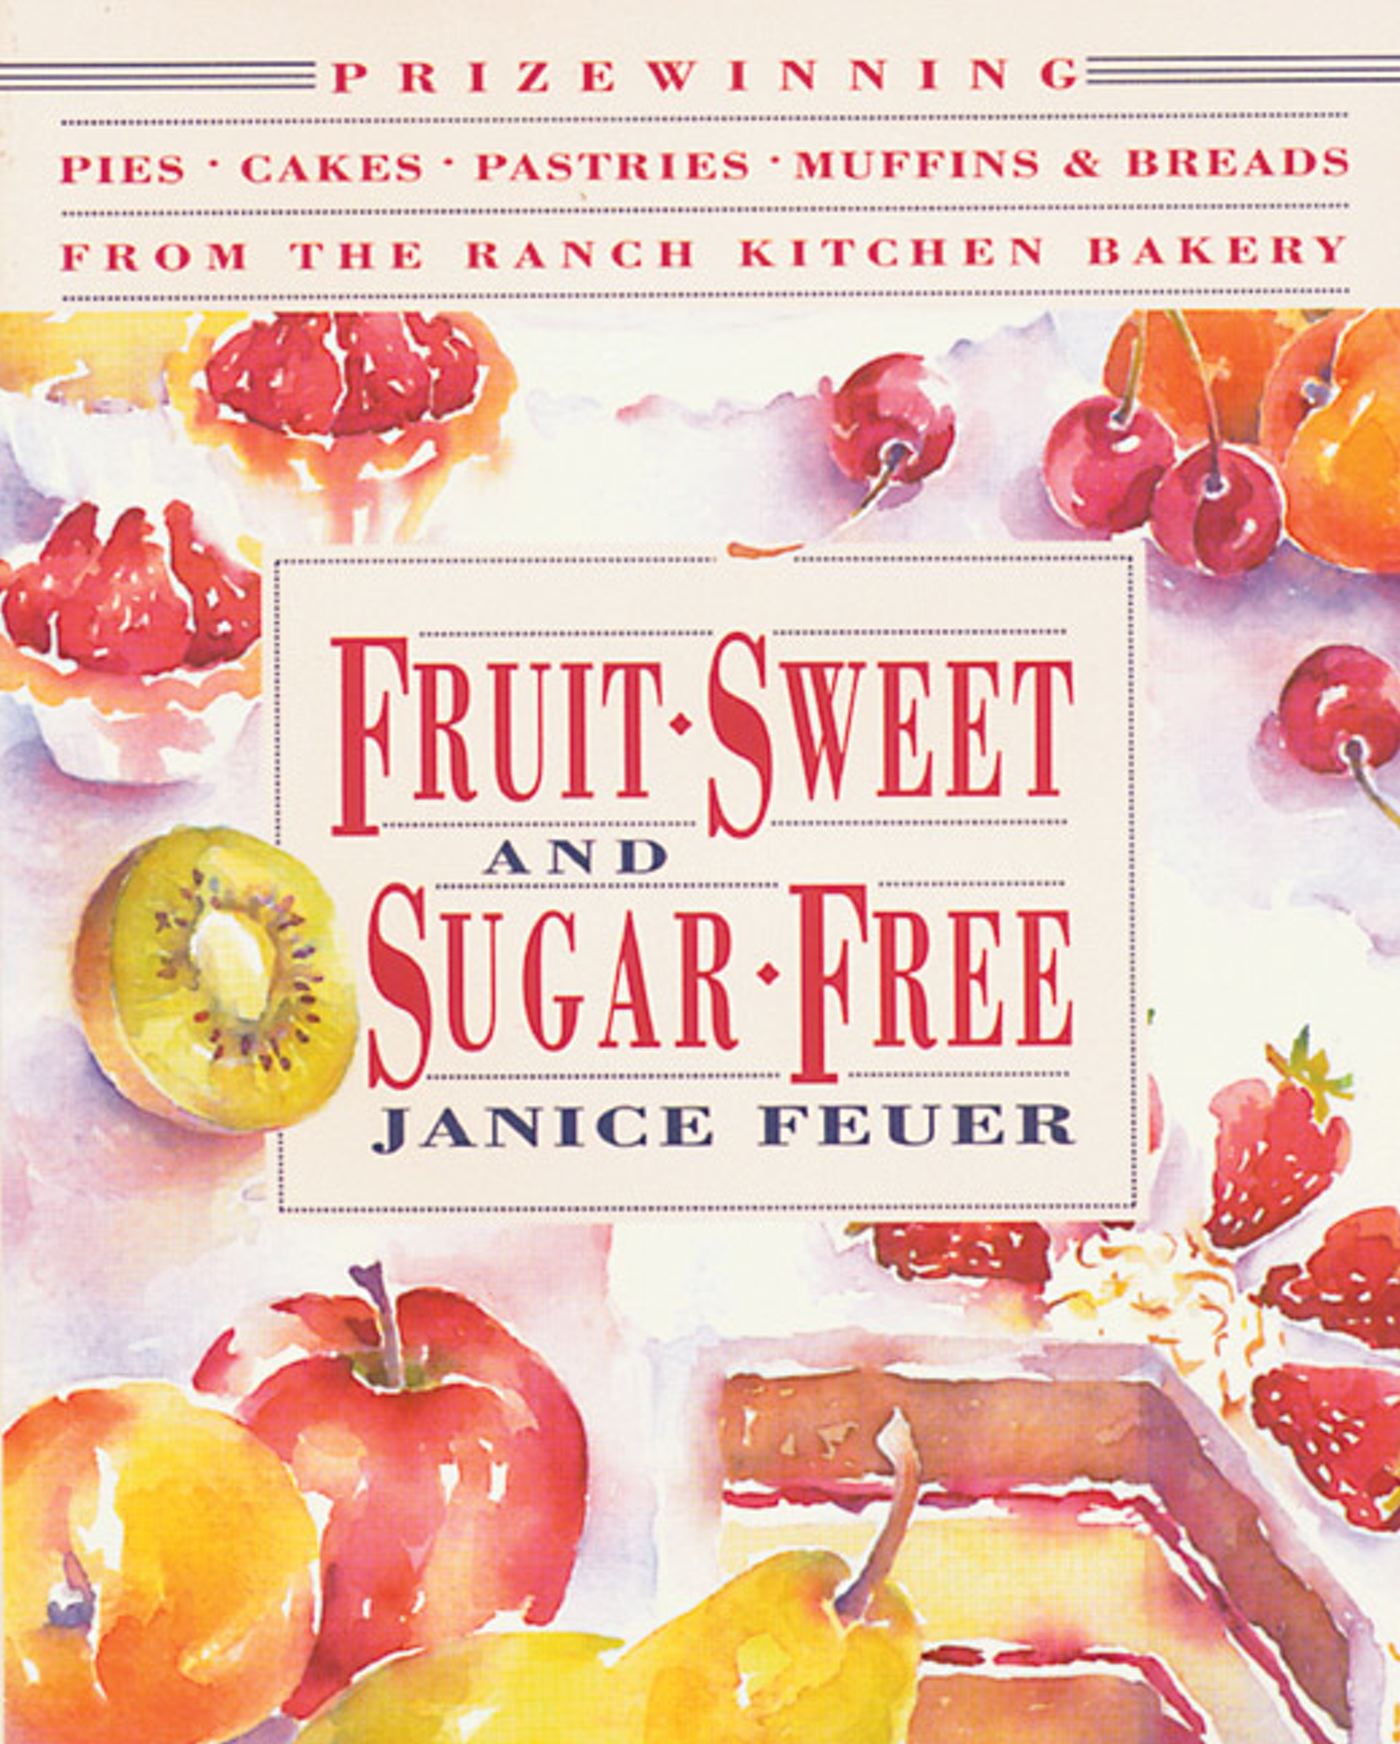 Fruit-Sweet and Sugar-Free : Prize-Winning Pies, Cakes, Pastries, Muffins, and Breads from the Ranch Kitchen Bakery